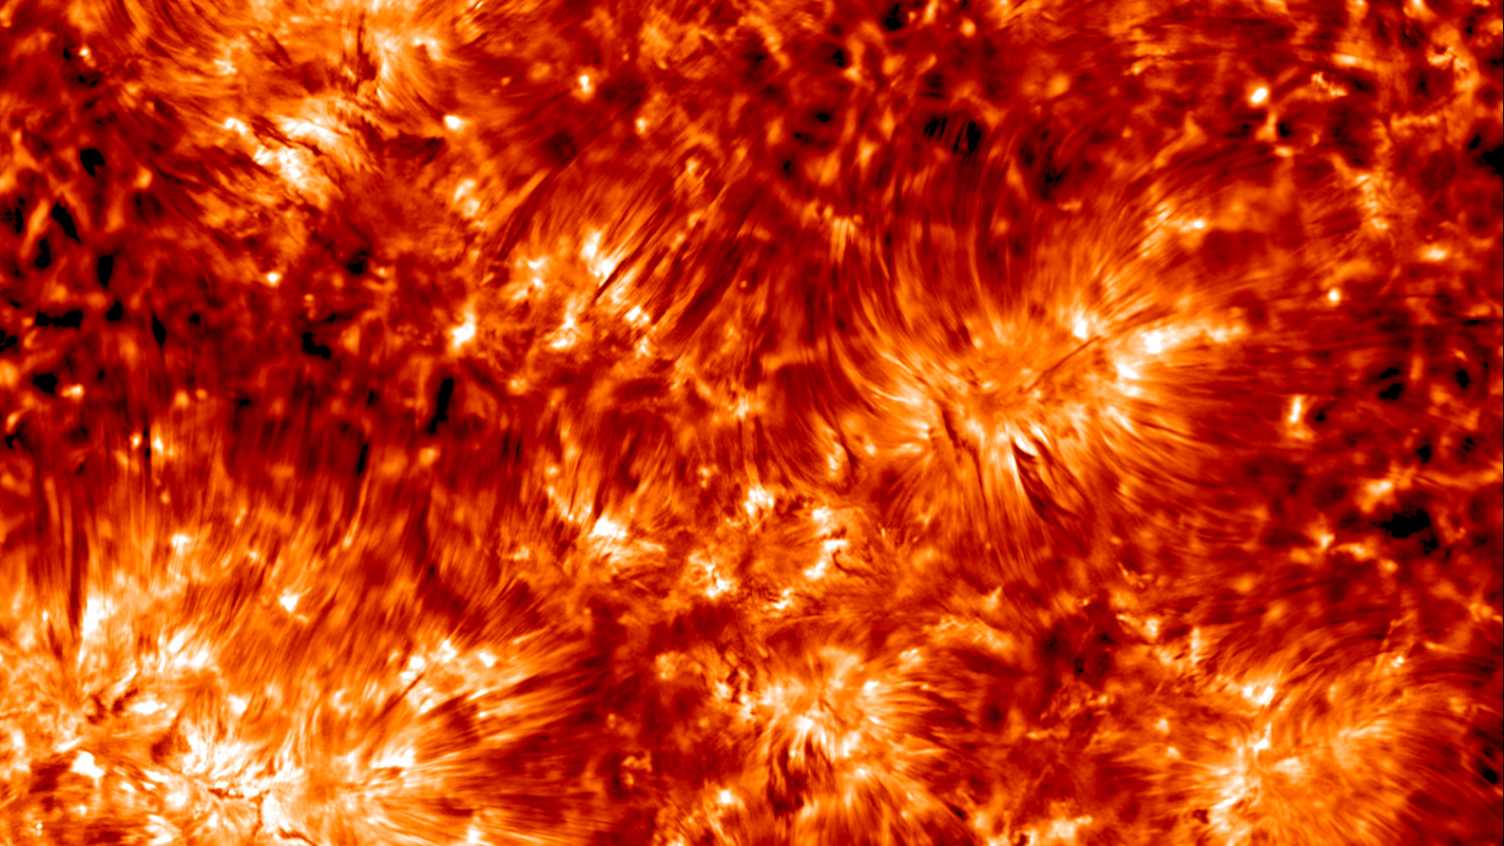 Thumbnail for State-of-the-art new telescope captures solar chromosphere | Mathematics and Sta…